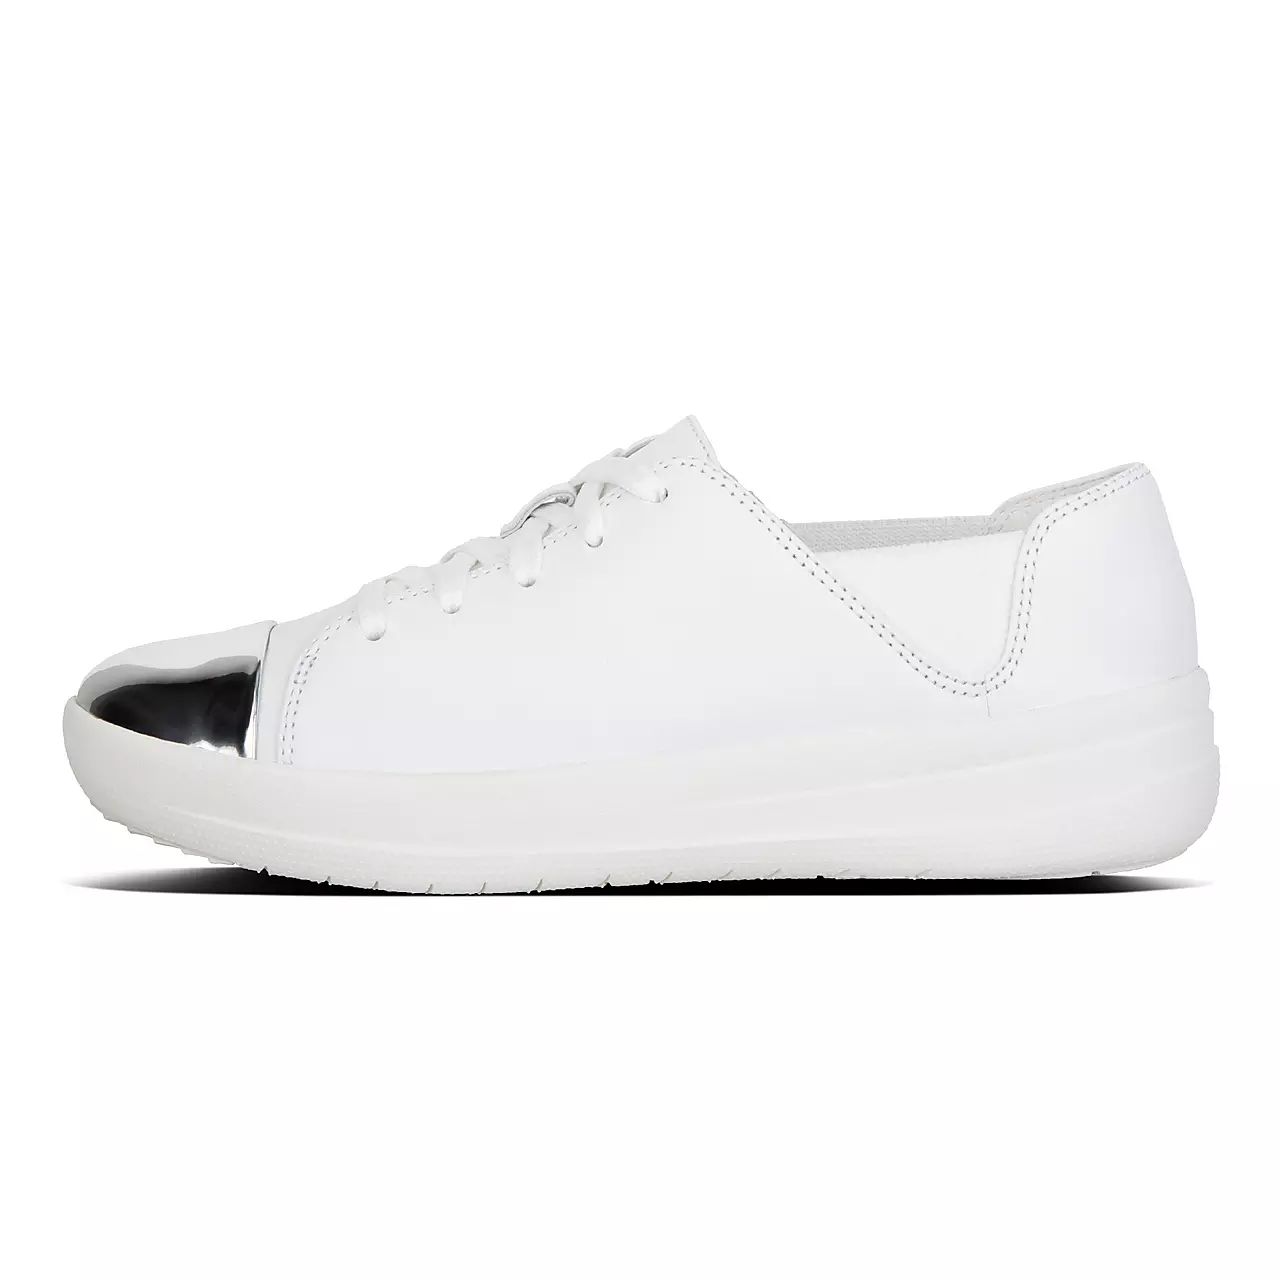 F-SPORTY mirror-toe leather sneakers